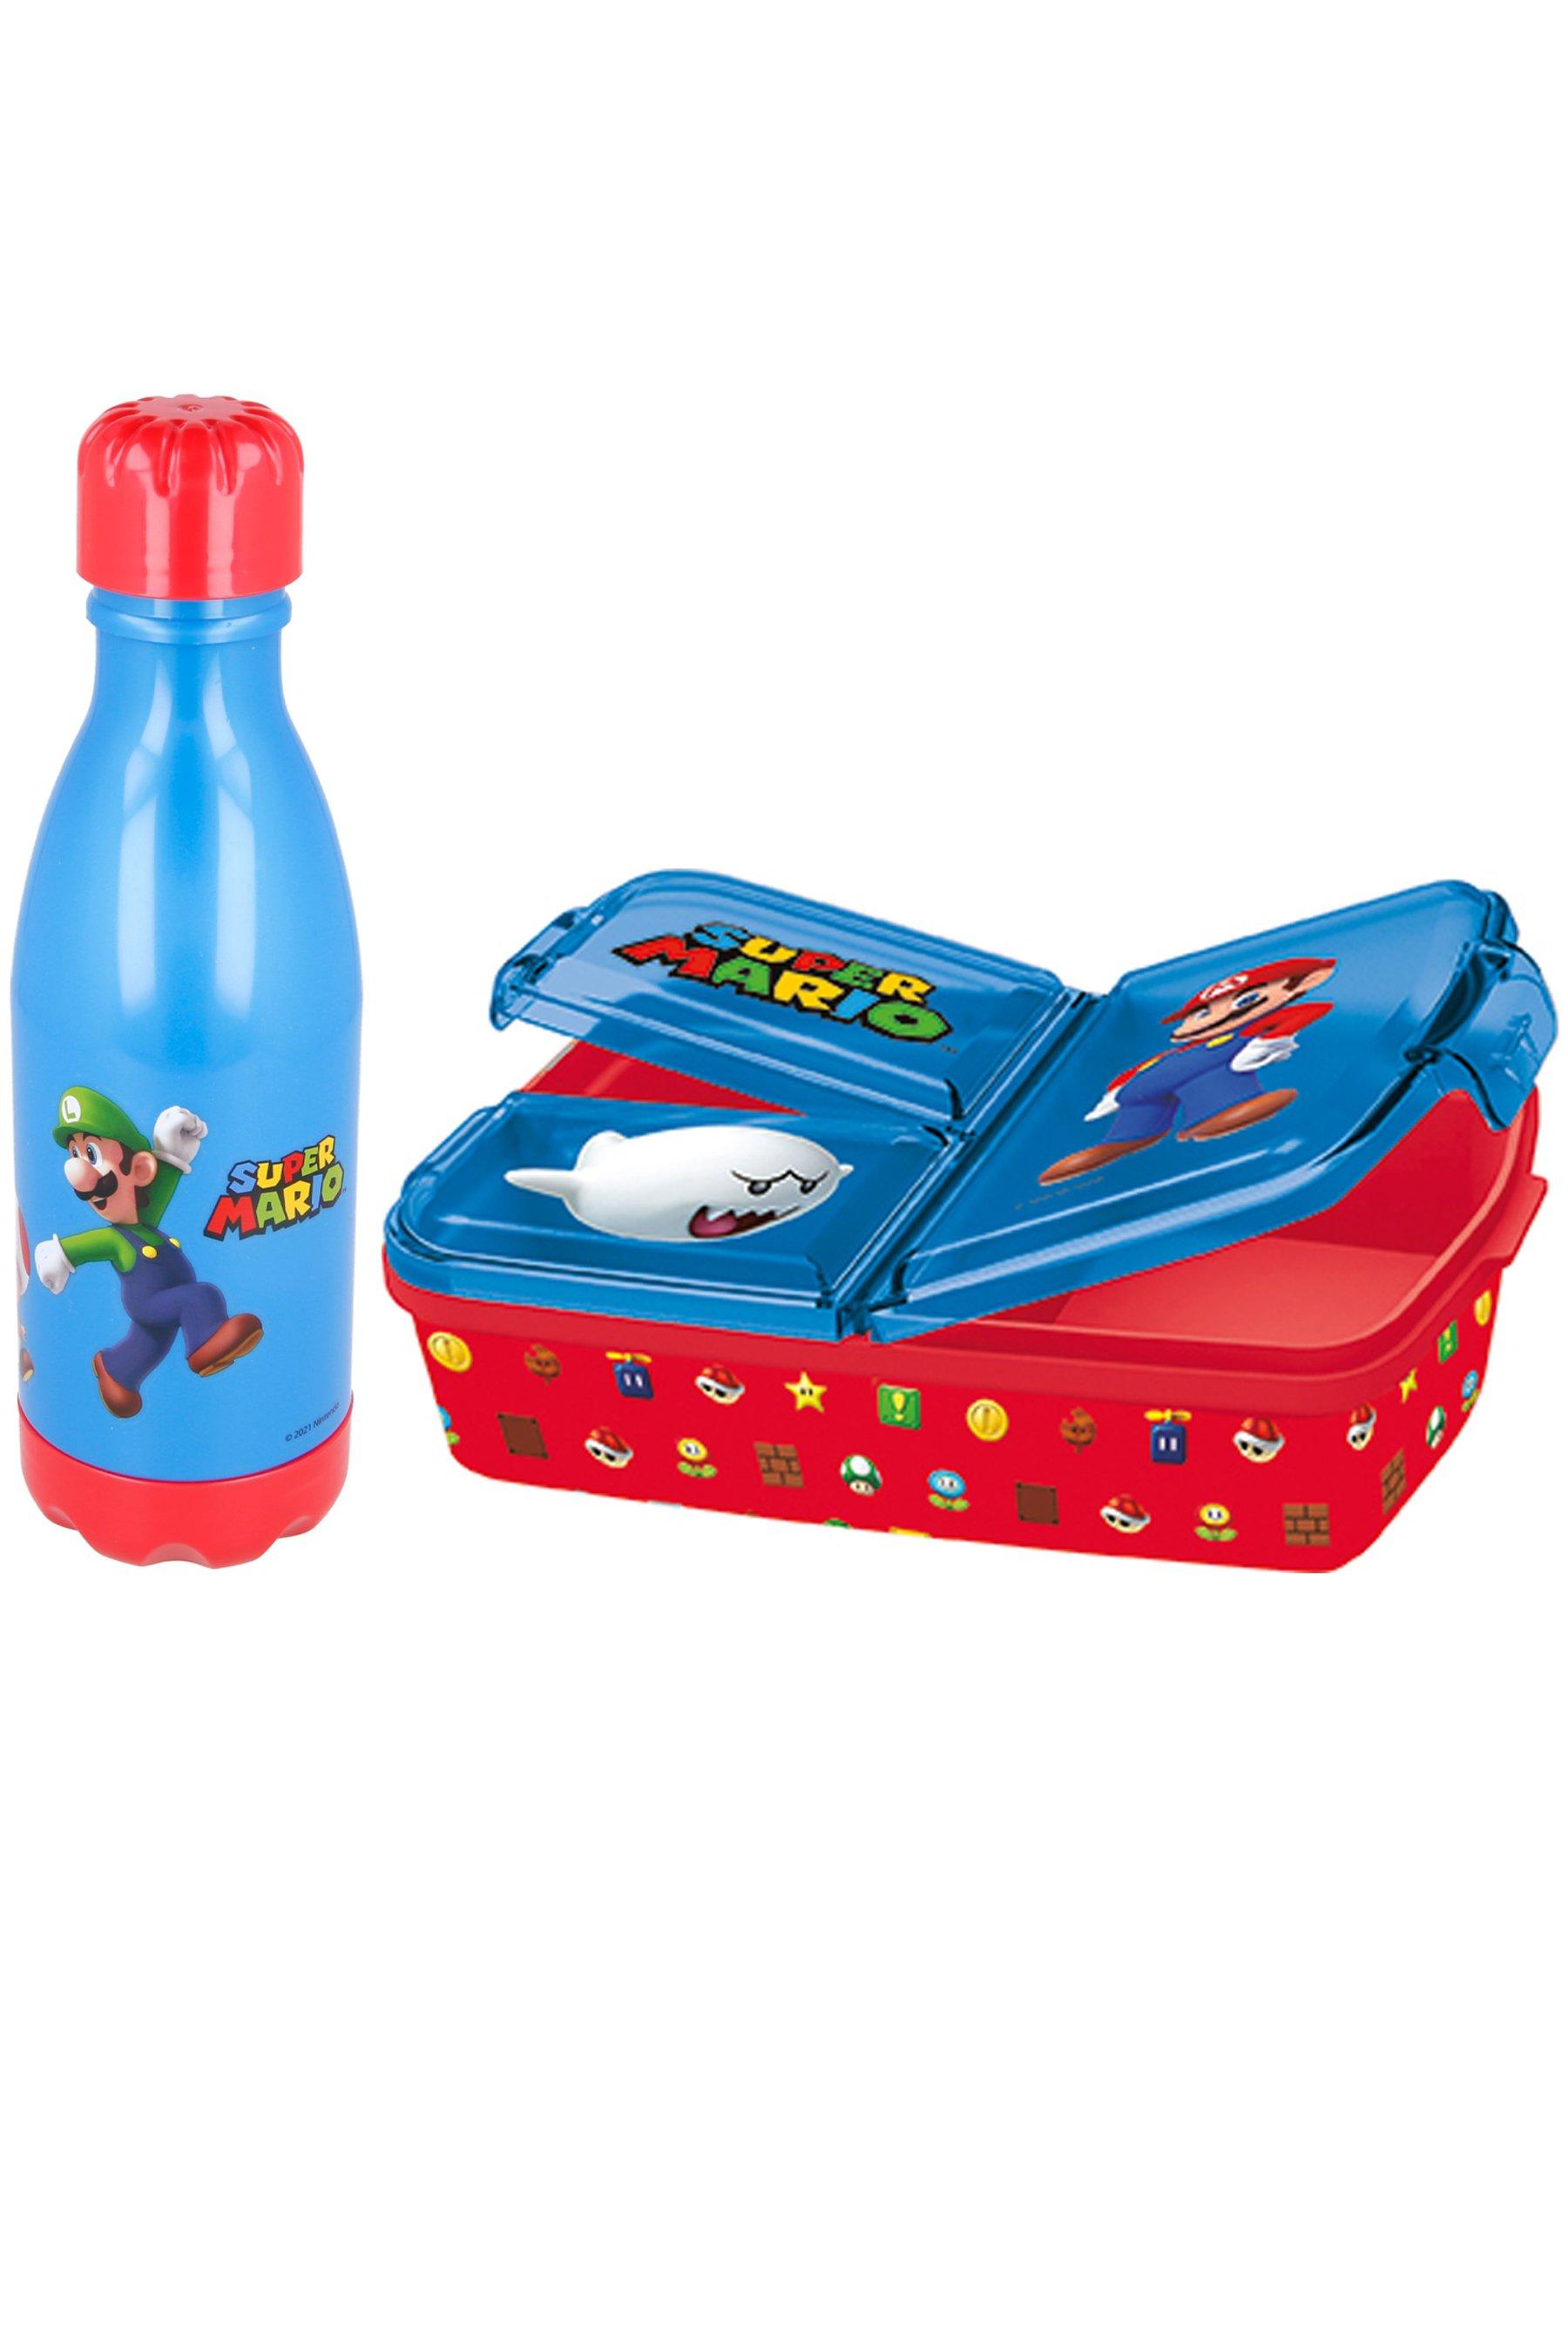 stor super mario sandwich box and daily pop bottle twin set